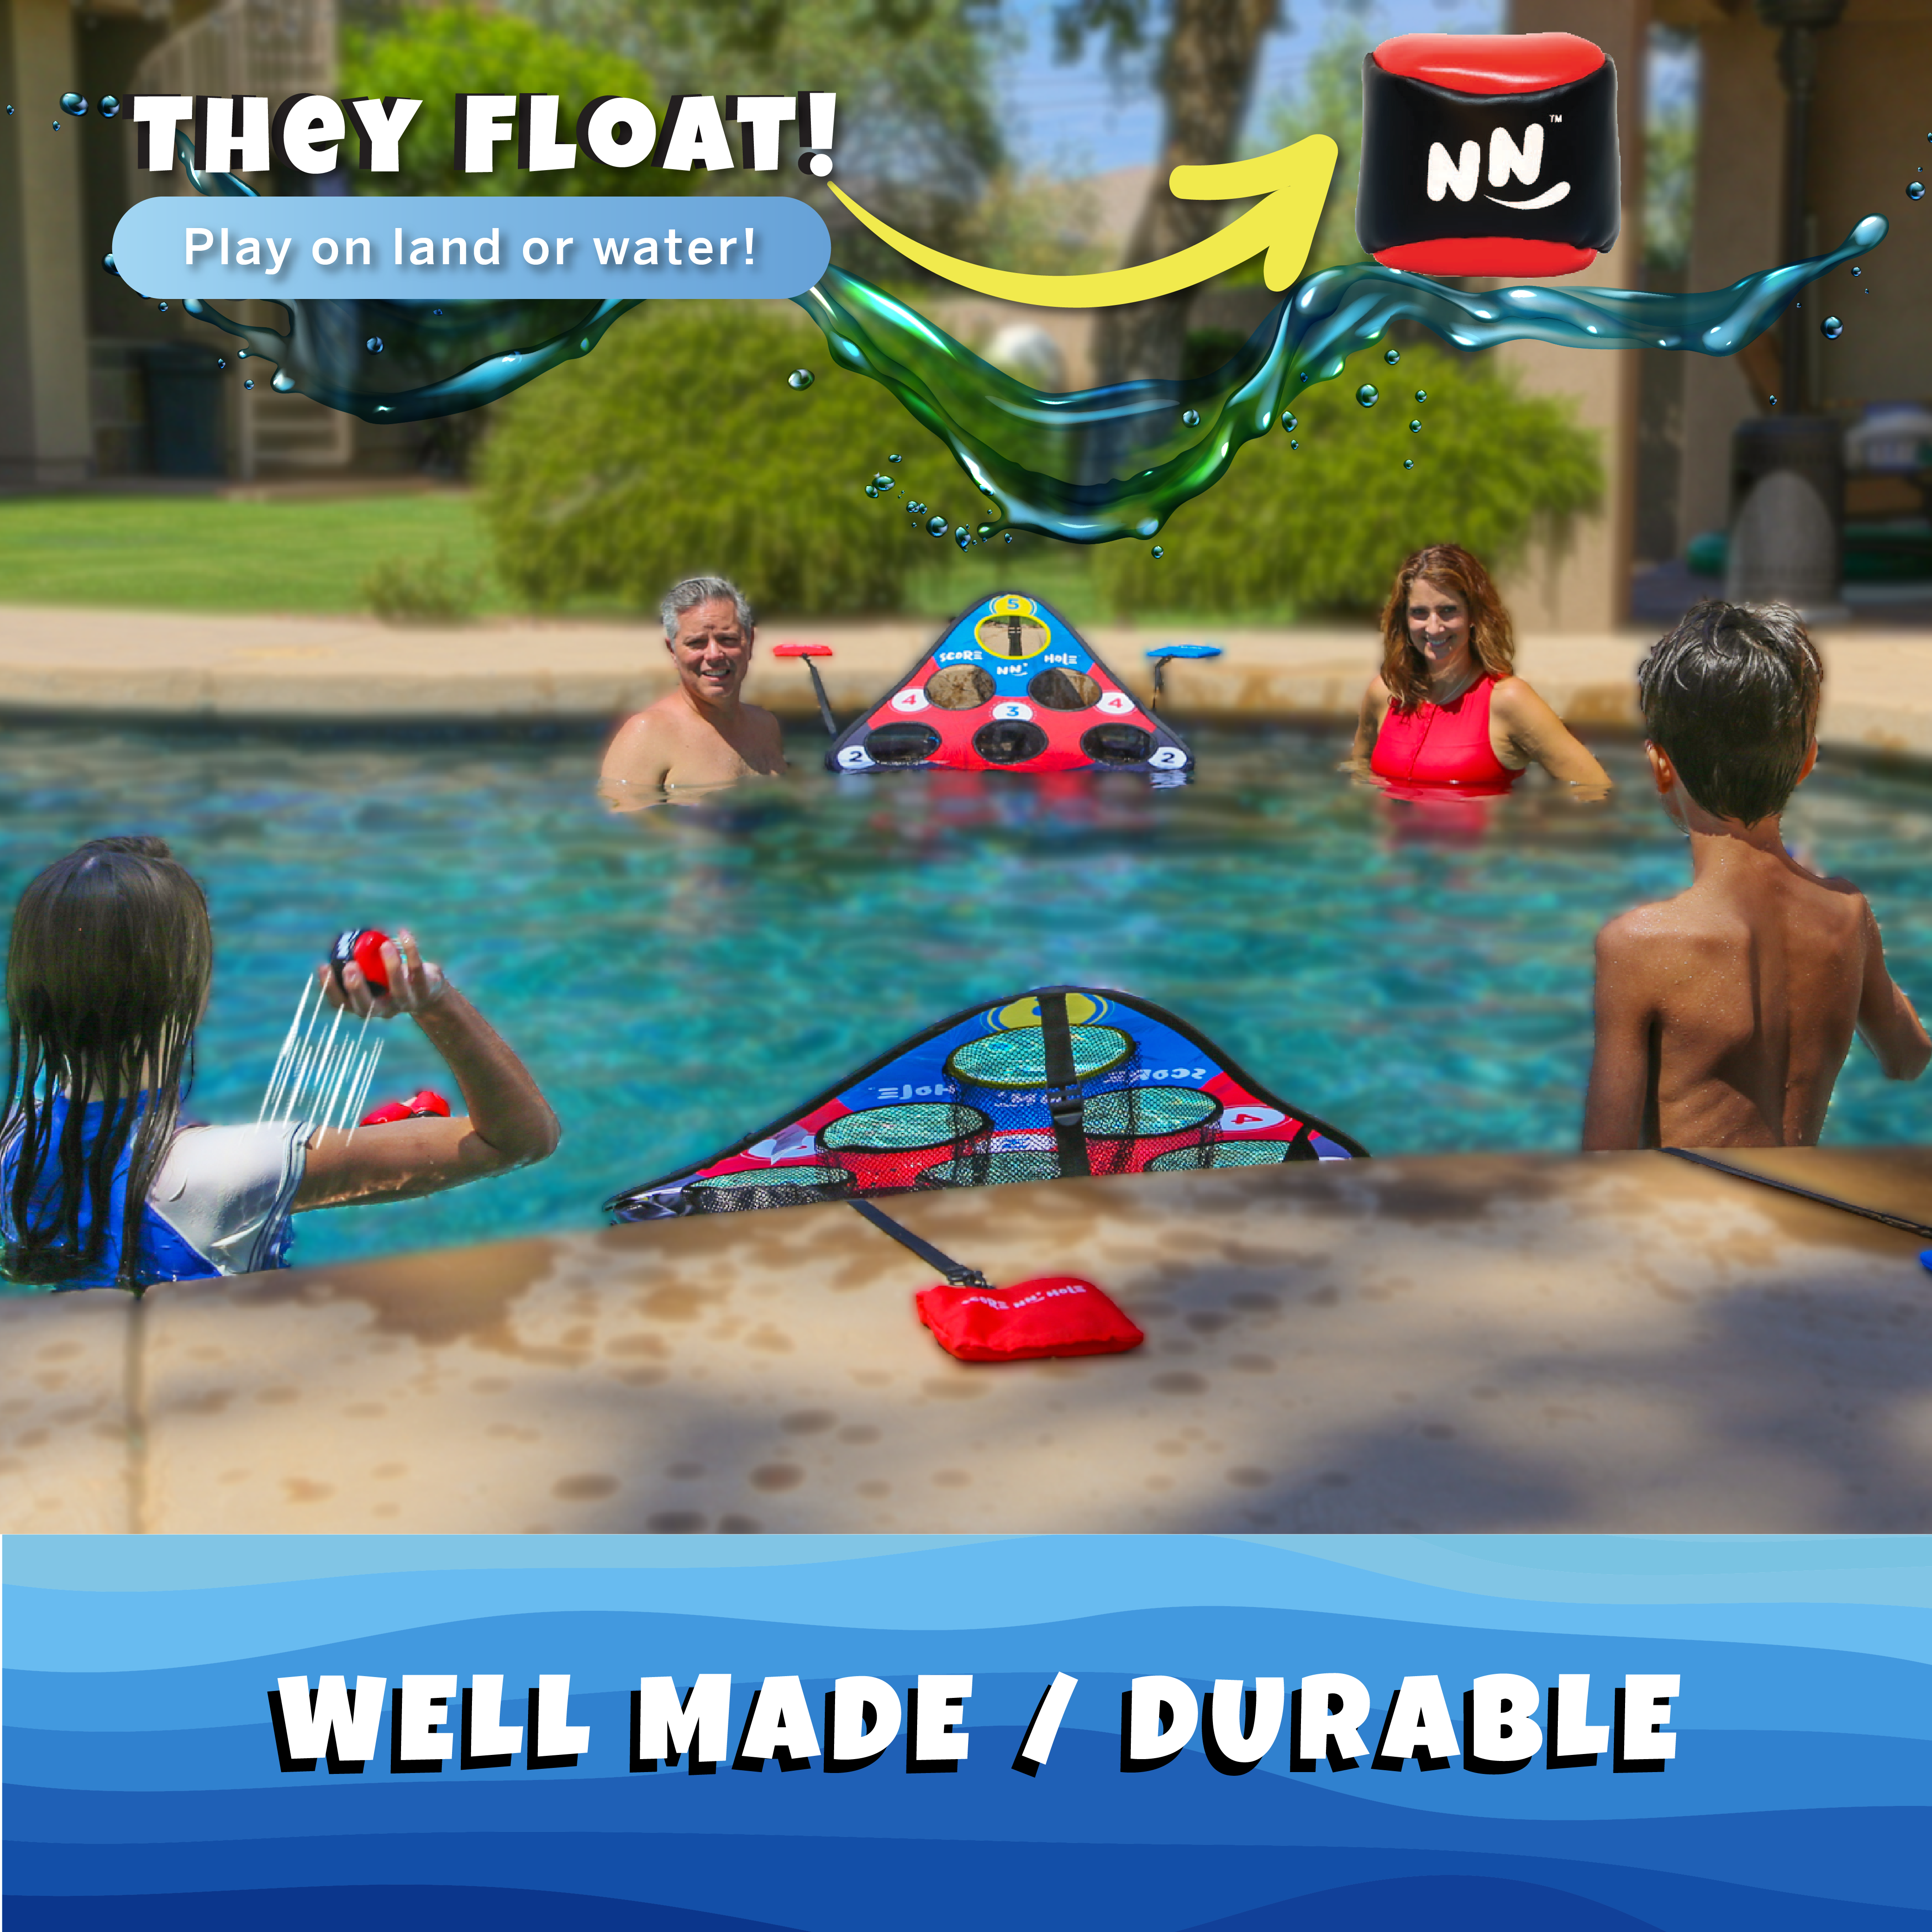 SKIP NN' HOLE + TOSS & ROLL NN' Hole | Pool and Land Game Set Bundle | Skipping Stone + Toss & Roll Cornhole Game for Pool, Land, or Lake | Great Game for All Ages